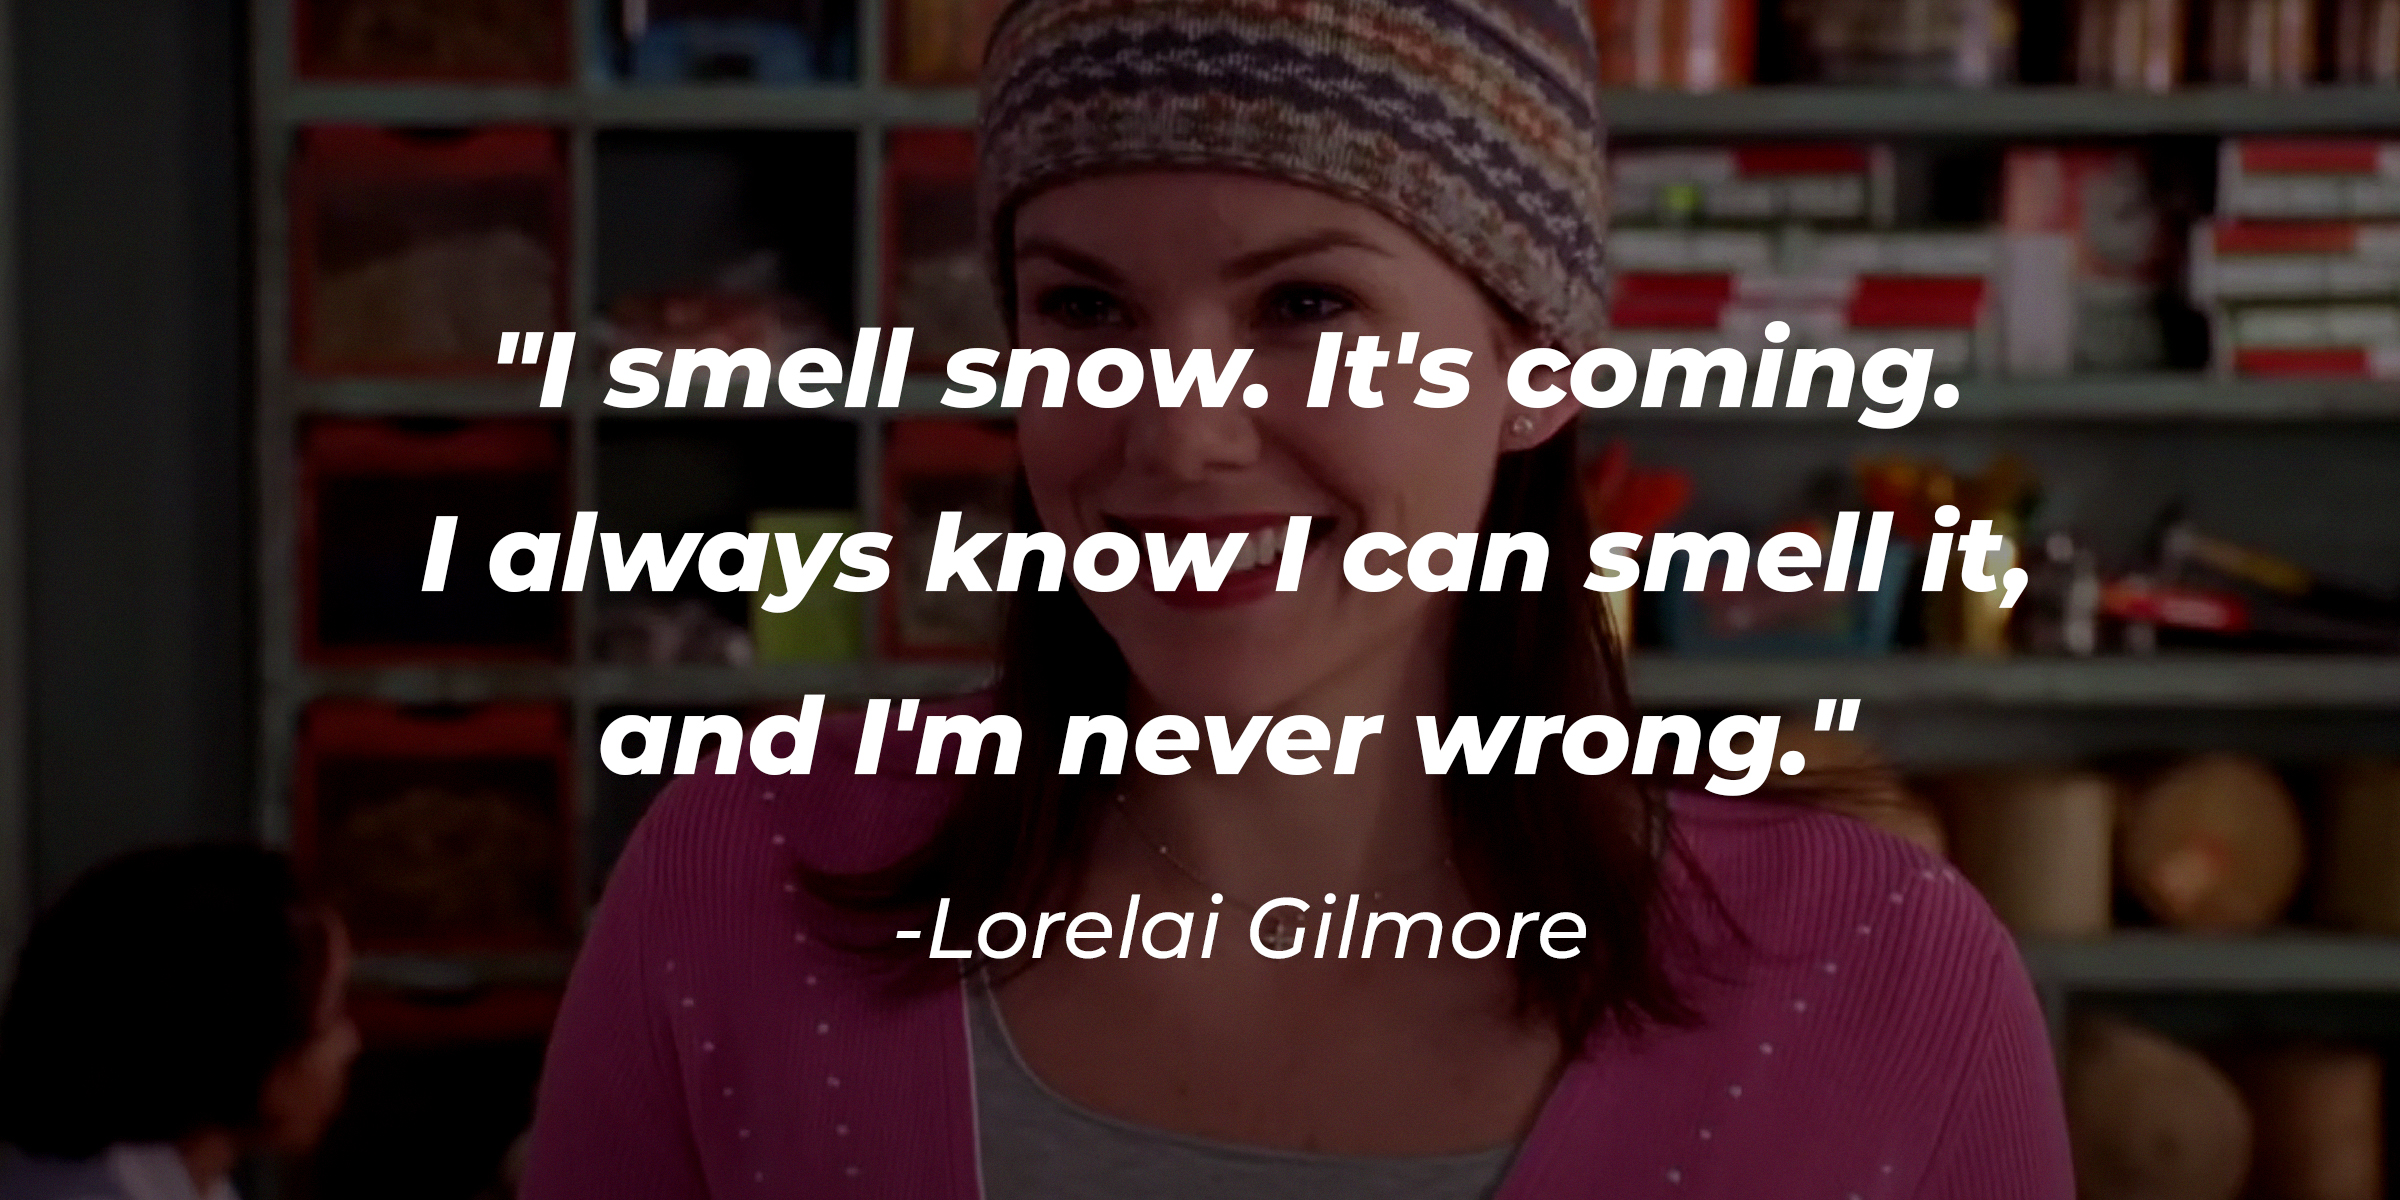 A photo of Lorelai Gilmore with the quote: "I smell snow. It's coming. I always know I can smell it, and I'm never wrong." | Source: facebook.com/GilmoreGirls